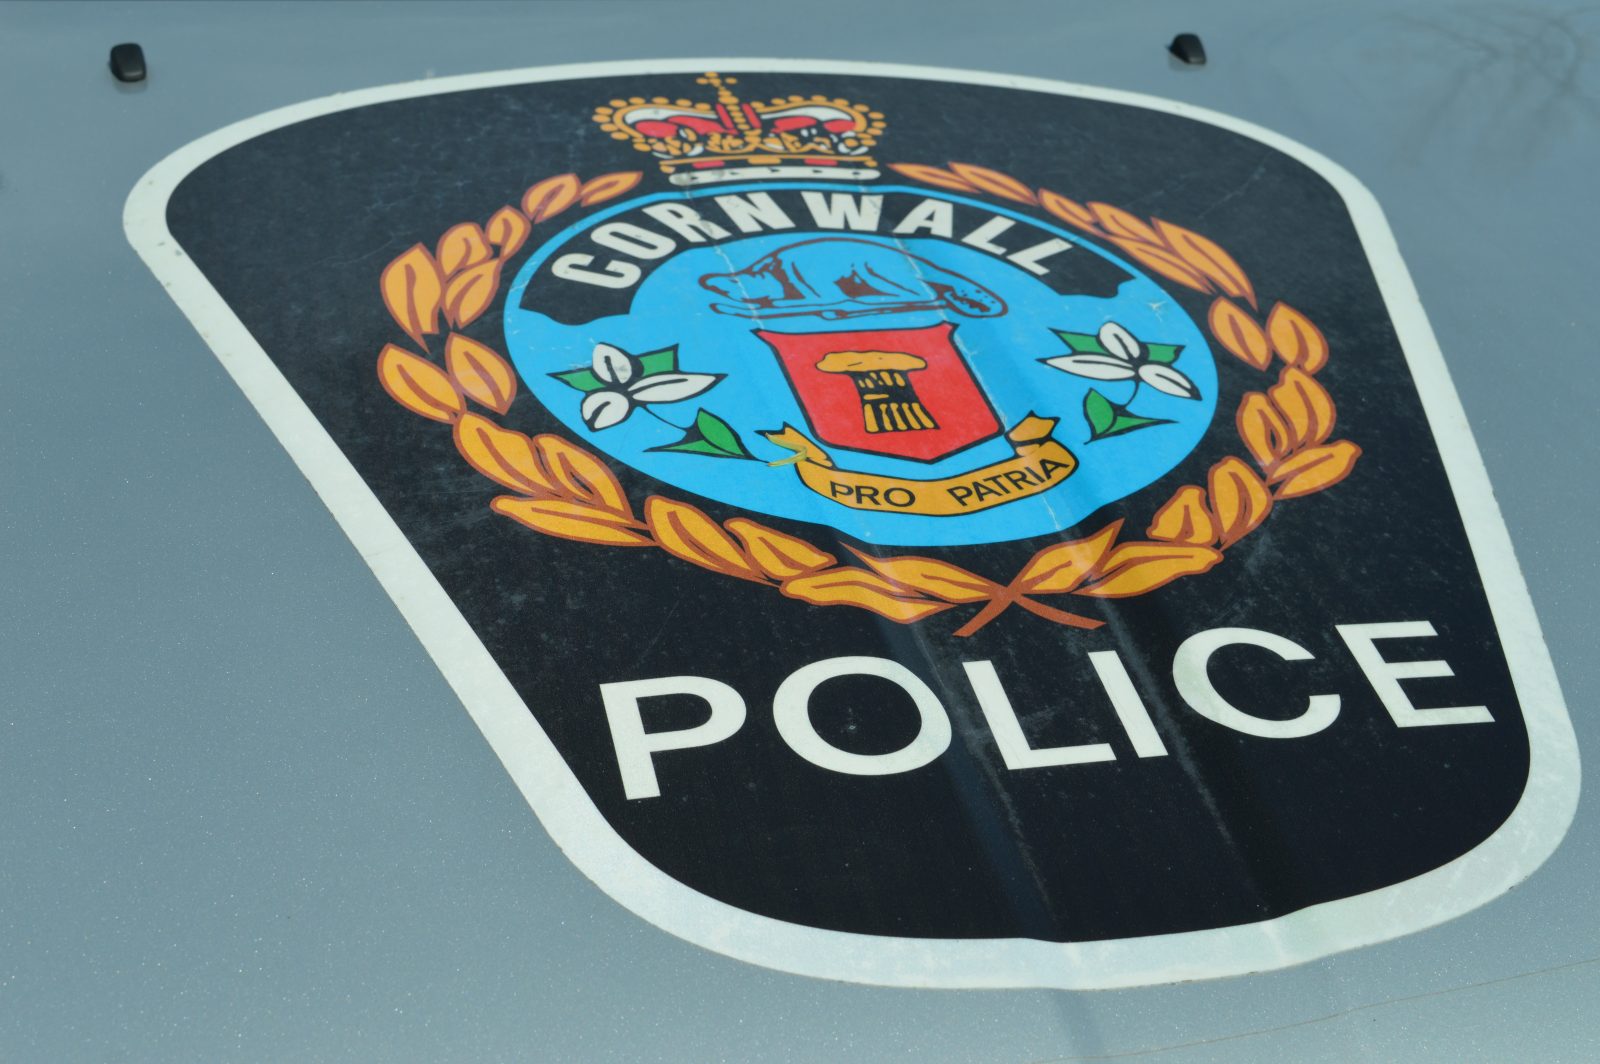 Breach investigation leads to drug charge